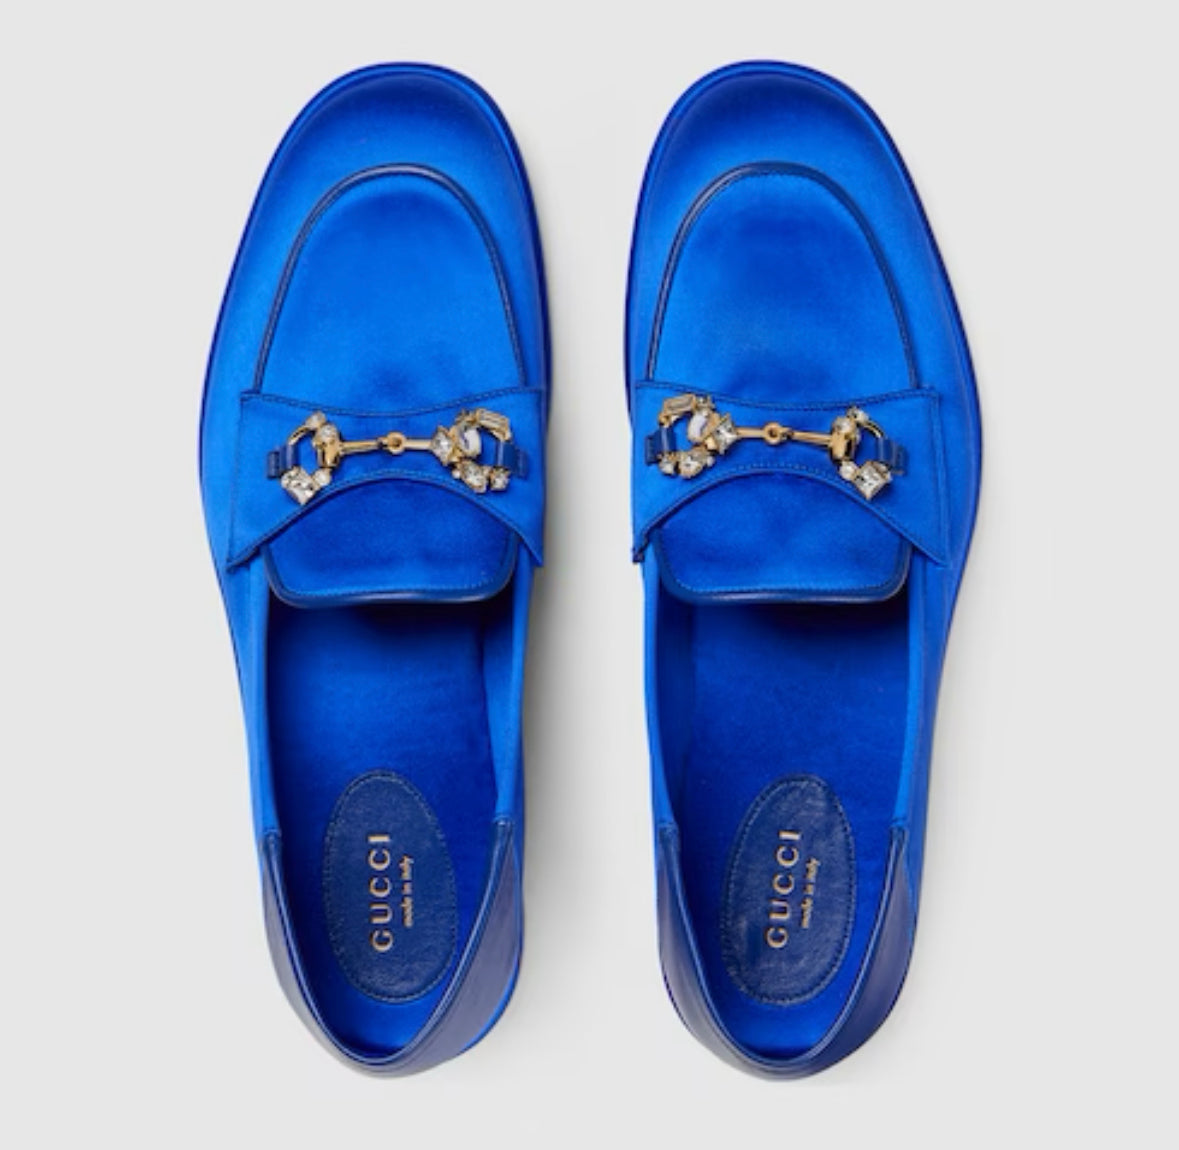 Gucci Womens Horsebit Loafer with Crystals “Blue”